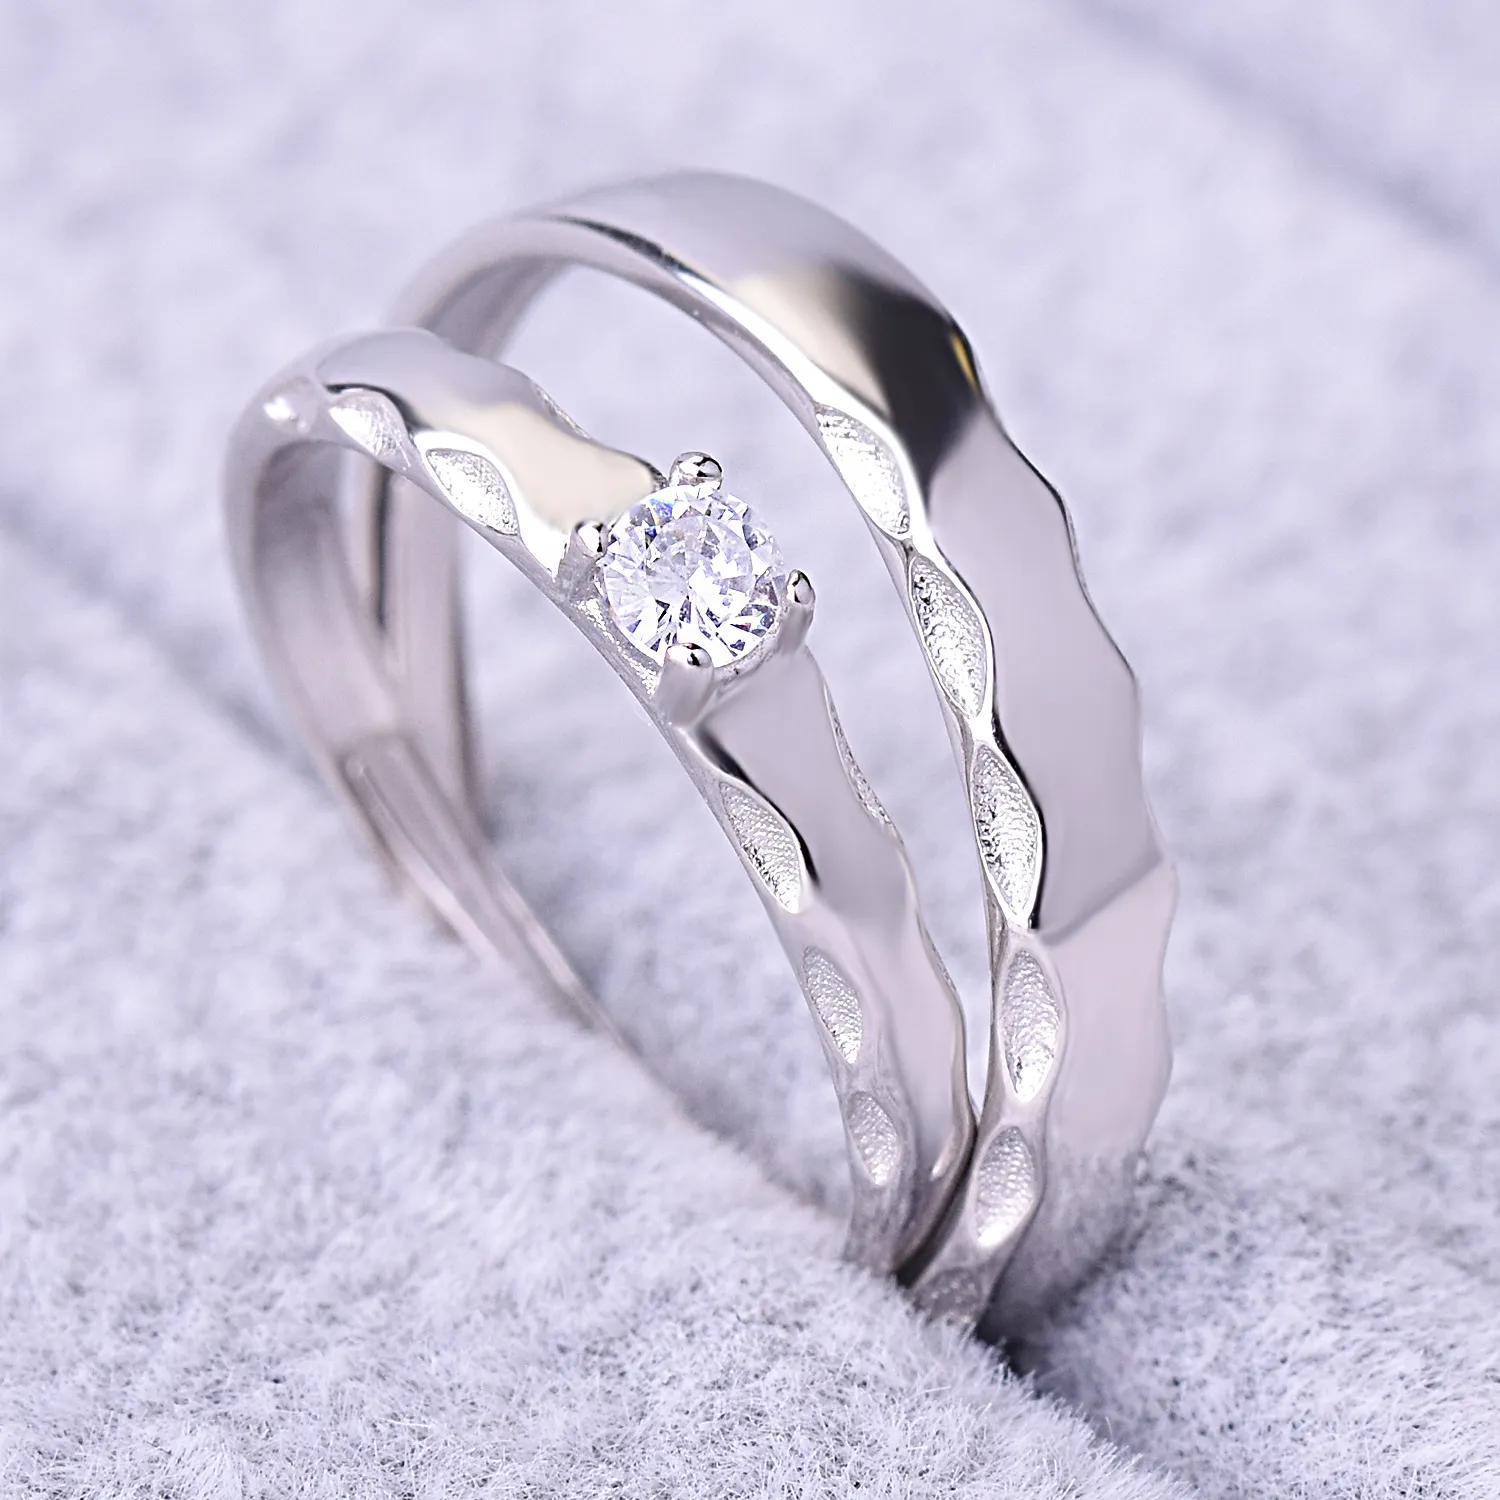 Elegant And Romantic Luxury 925 Sterling Silver Inlaid CZ Couple Rings | Engagement  rings couple, Couple wedding rings, Silver engagement rings